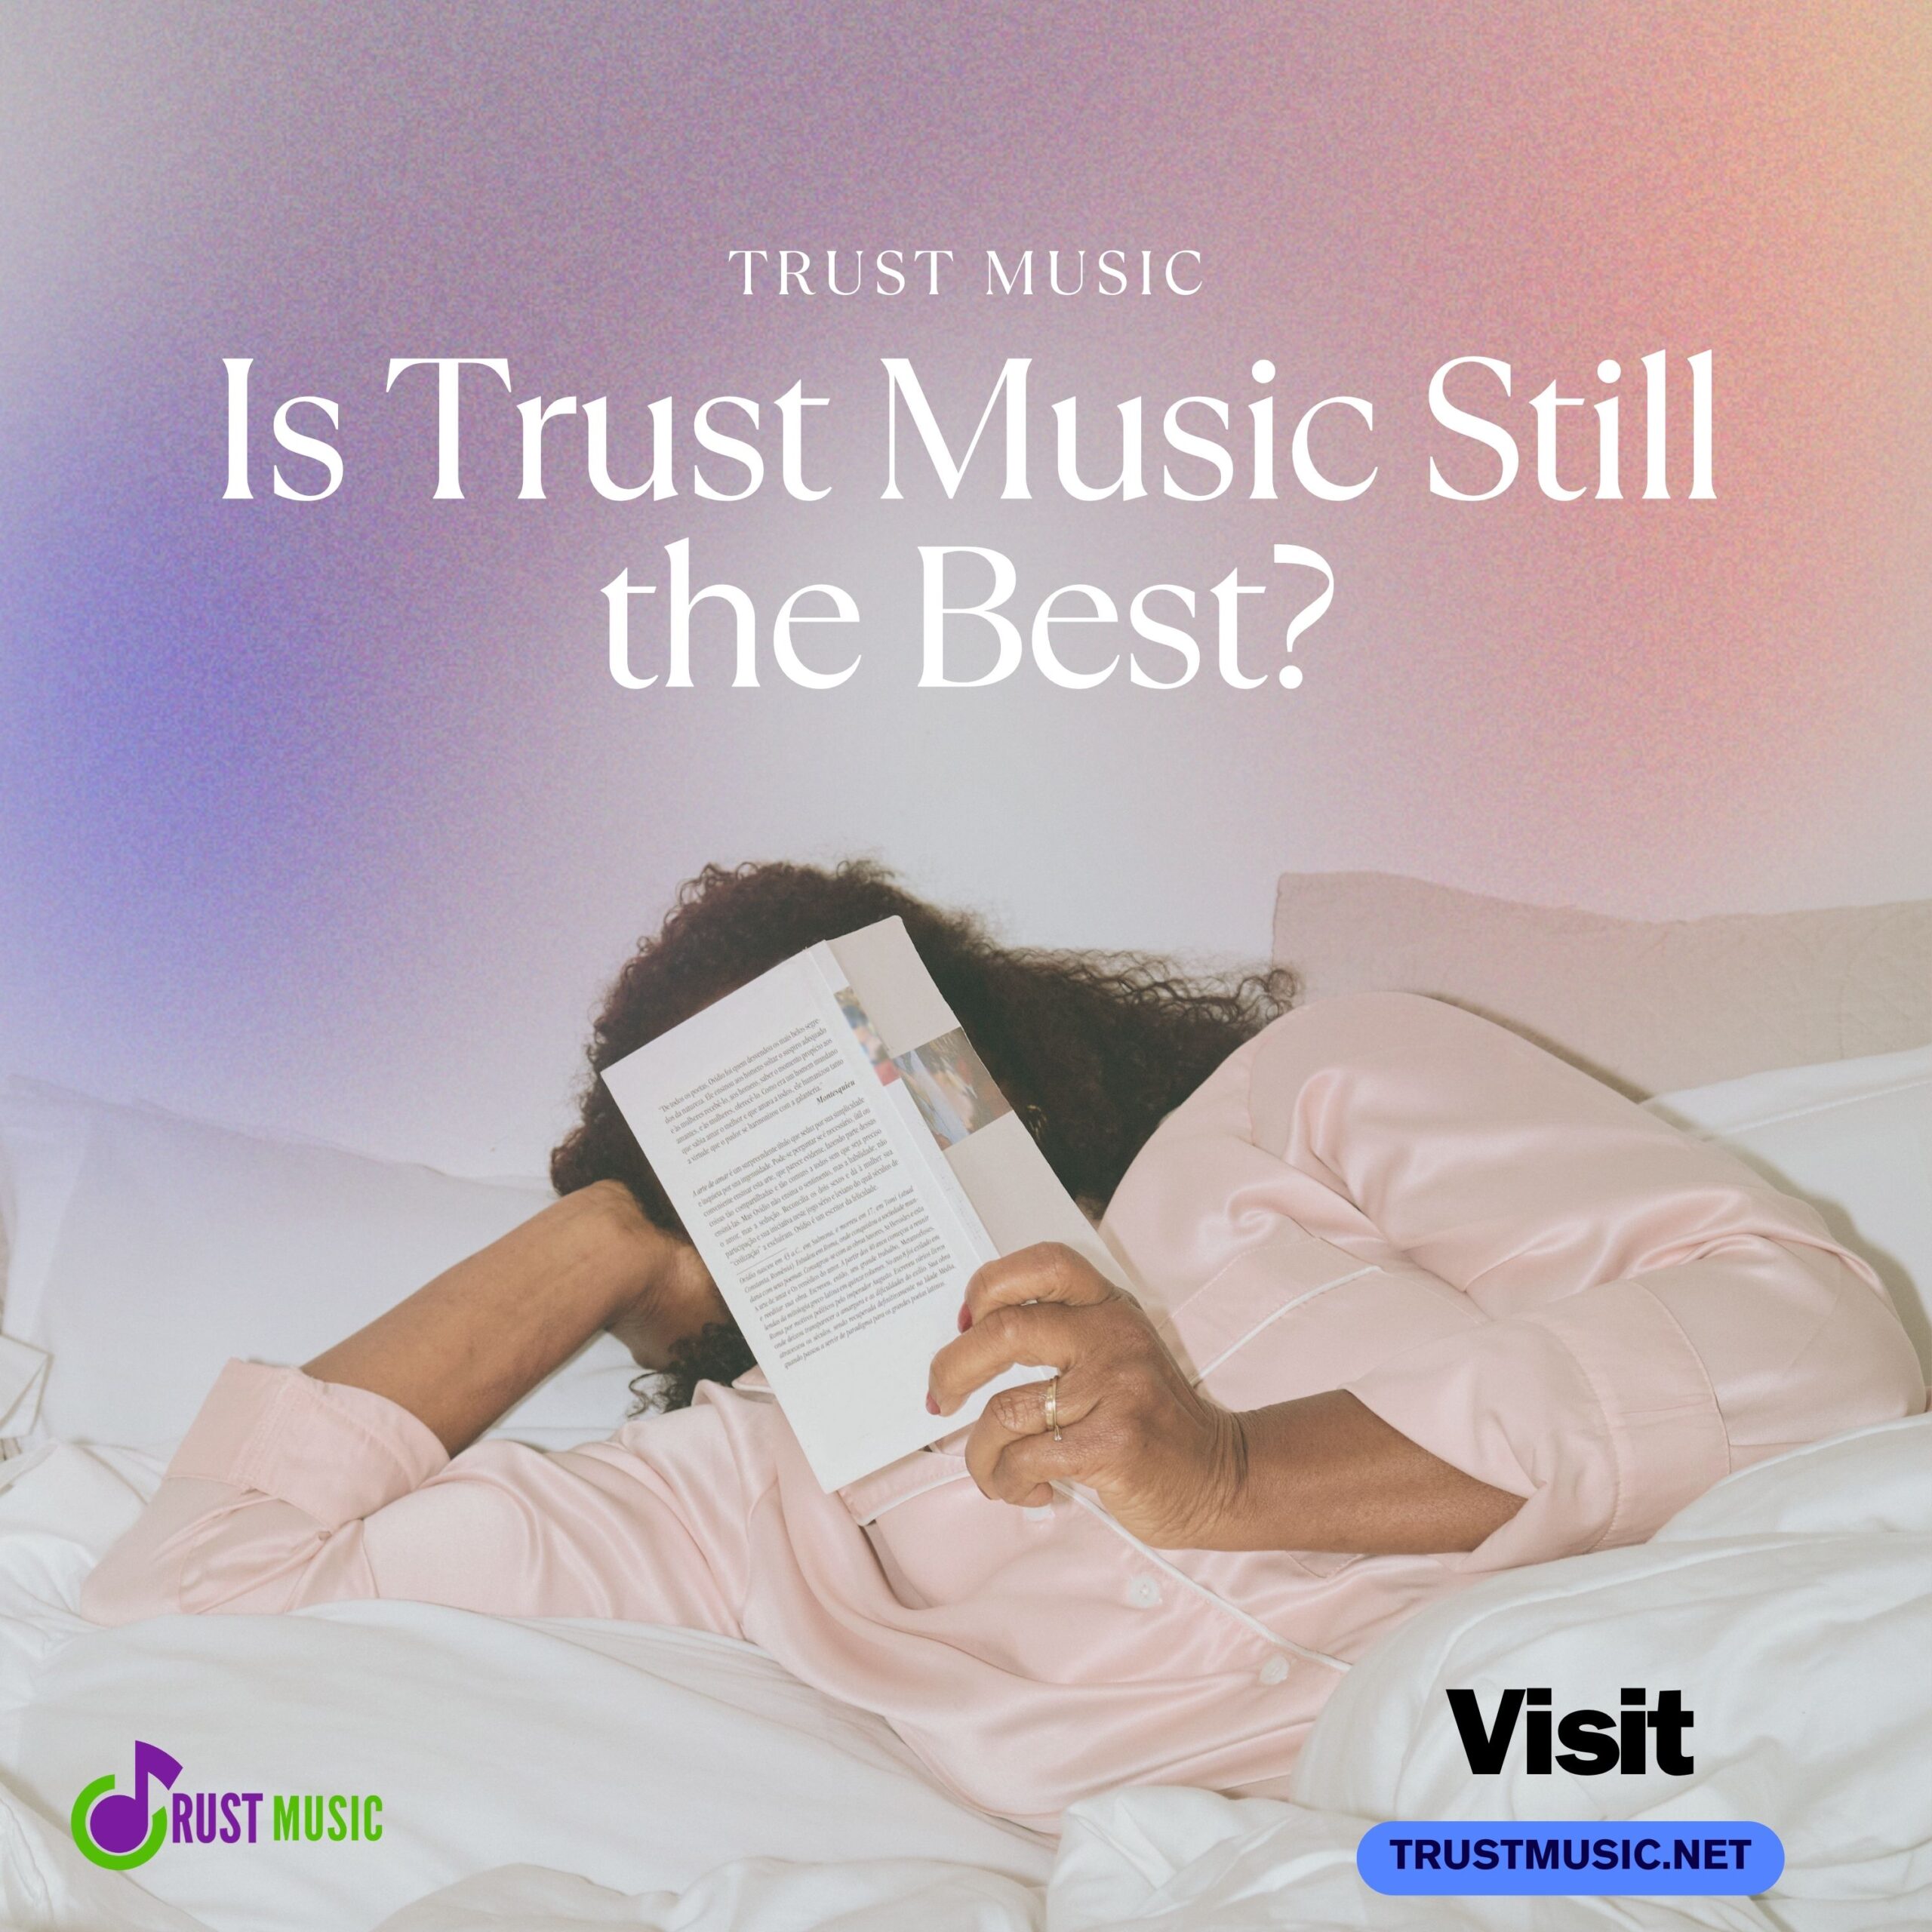 Is Trust Music Still the Best? number 1 distributor